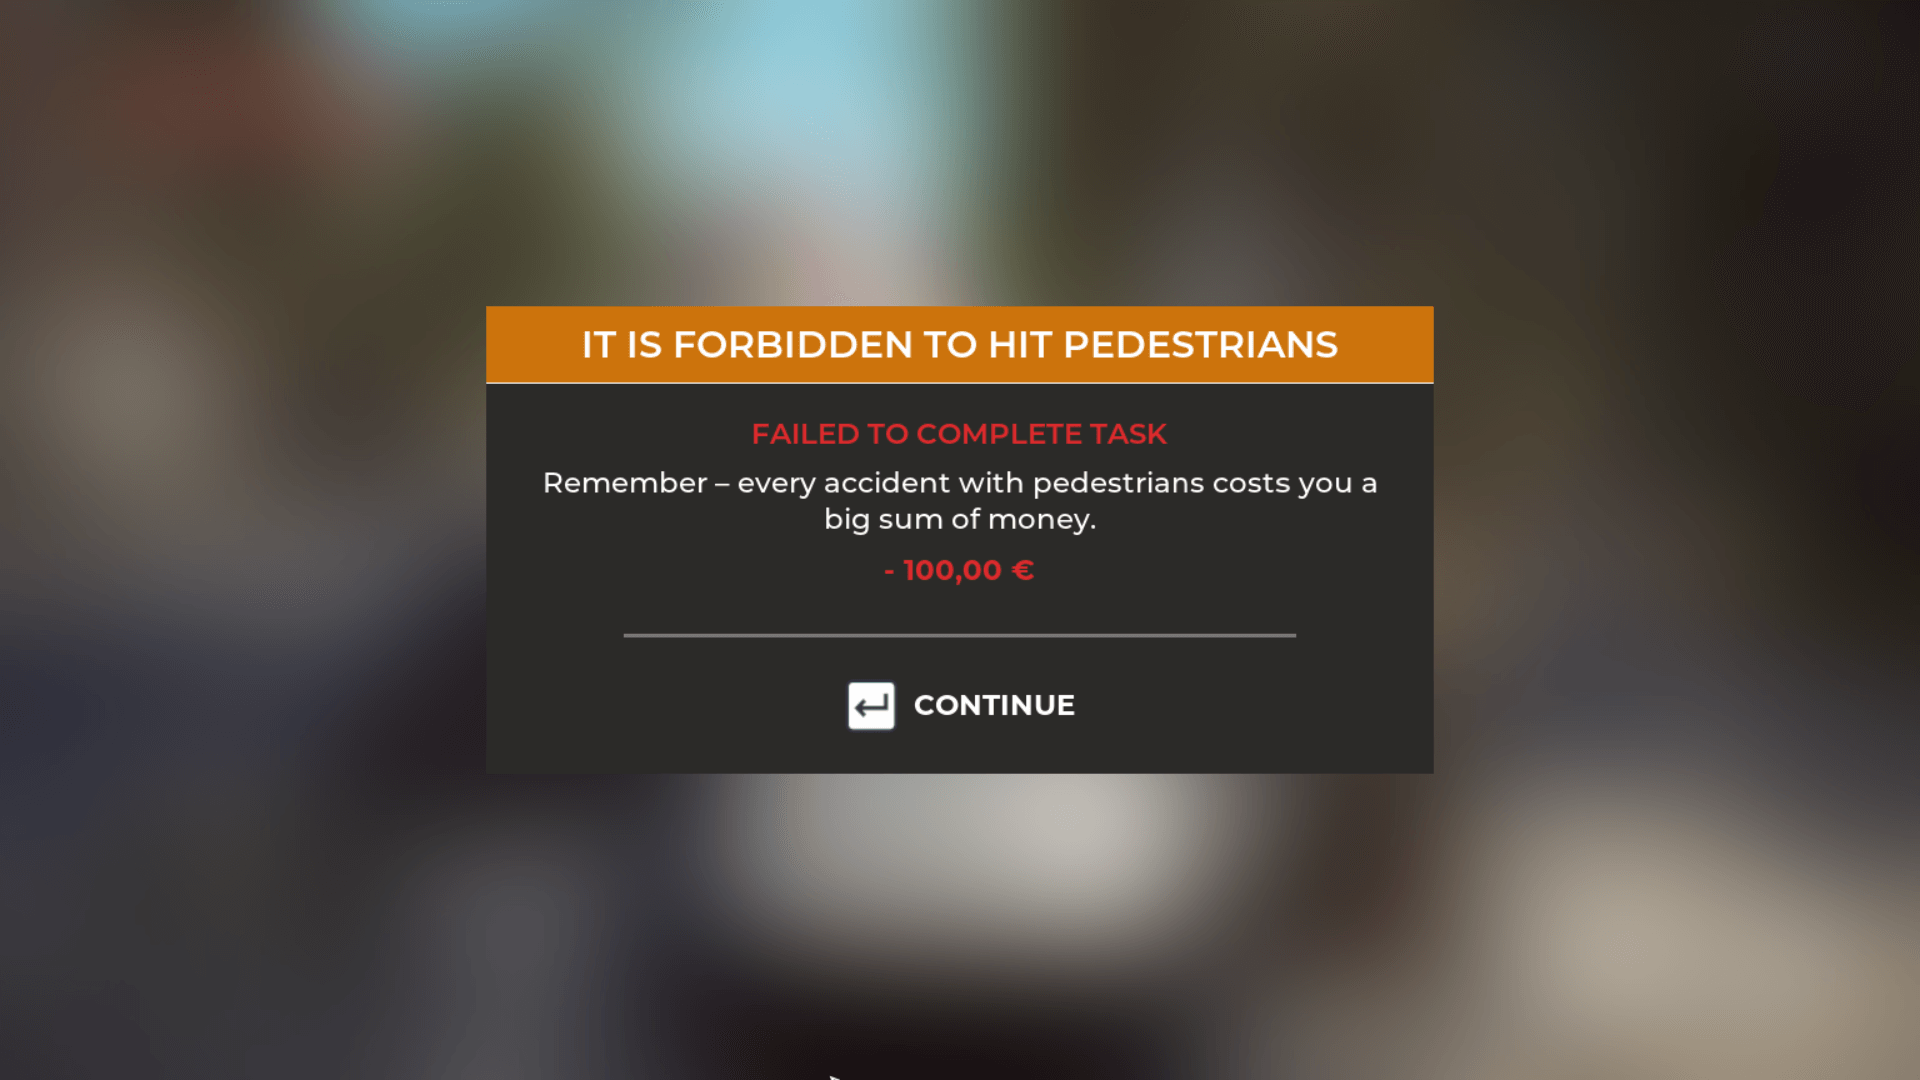 Image shows a black box with writing in which says "IT IS FORBIDDEN TO HIT PEDESTRIANS" and states that due to hitting a pedestrian, it has cost the player a big sum of money.